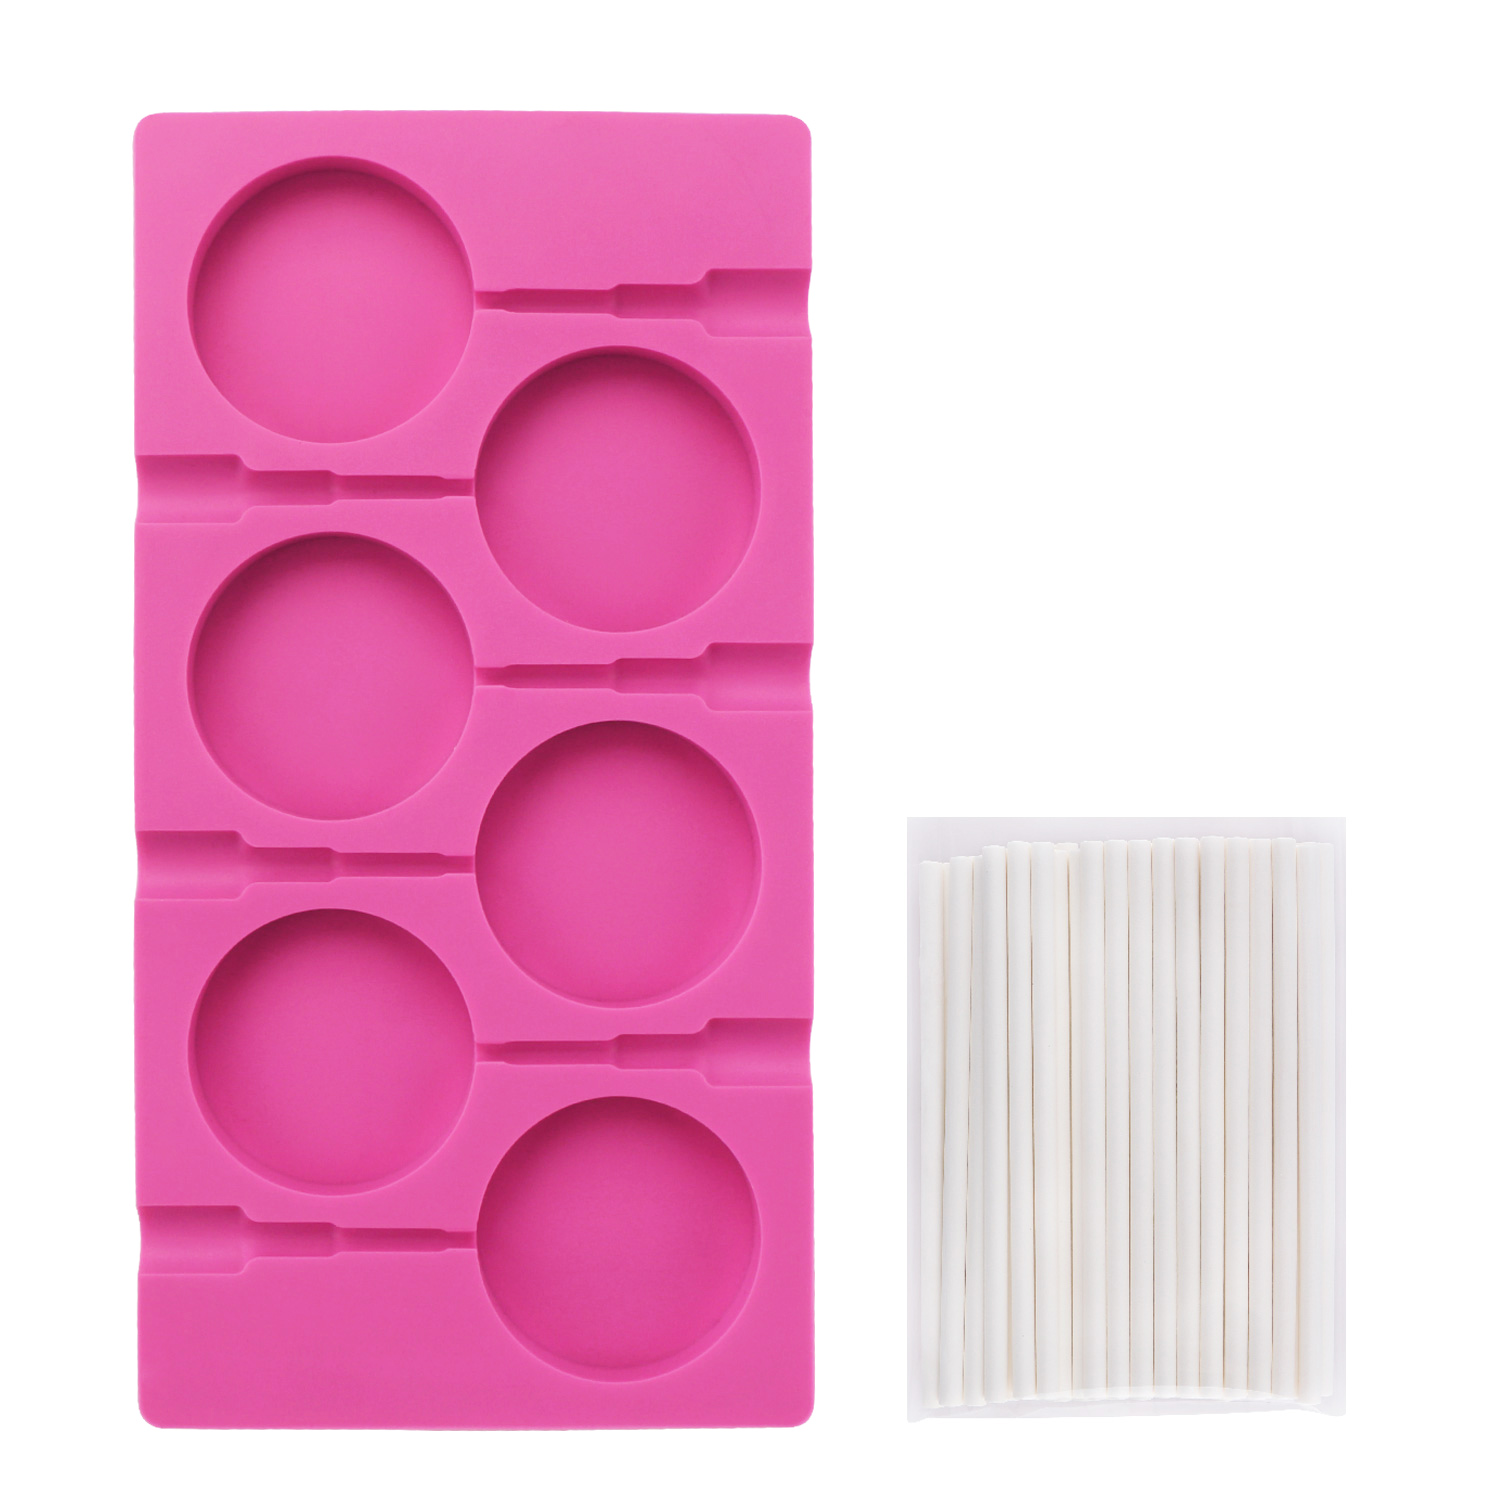 6 Cavity Silicone Molds for Soap Making DIY Handmade Soap Mold